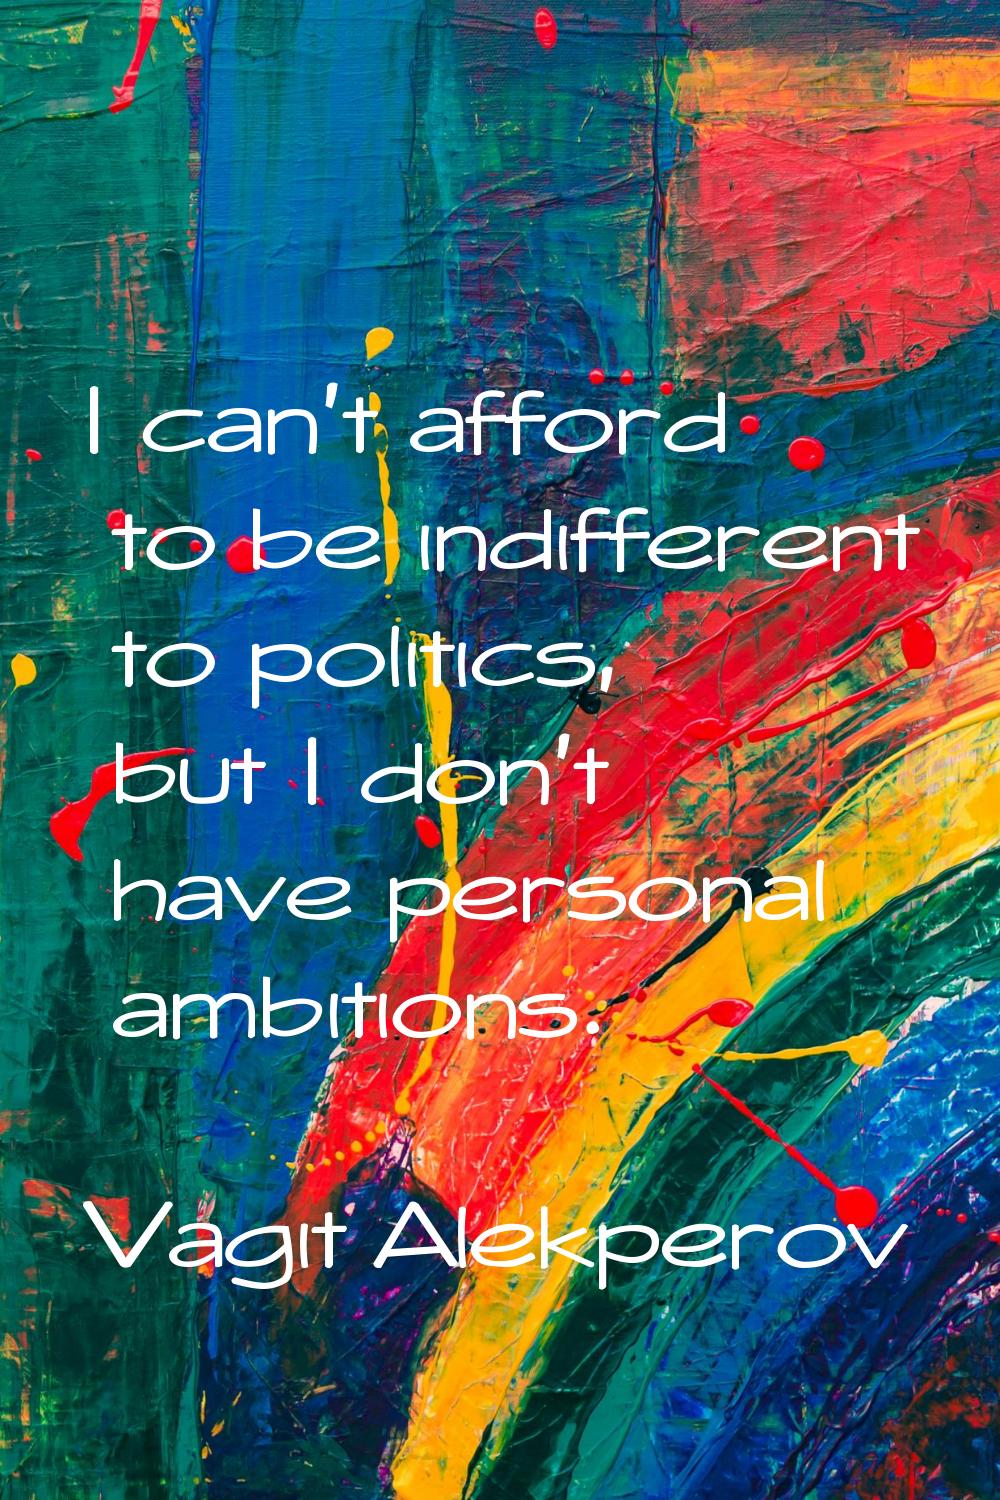 I can't afford to be indifferent to politics, but I don't have personal ambitions.